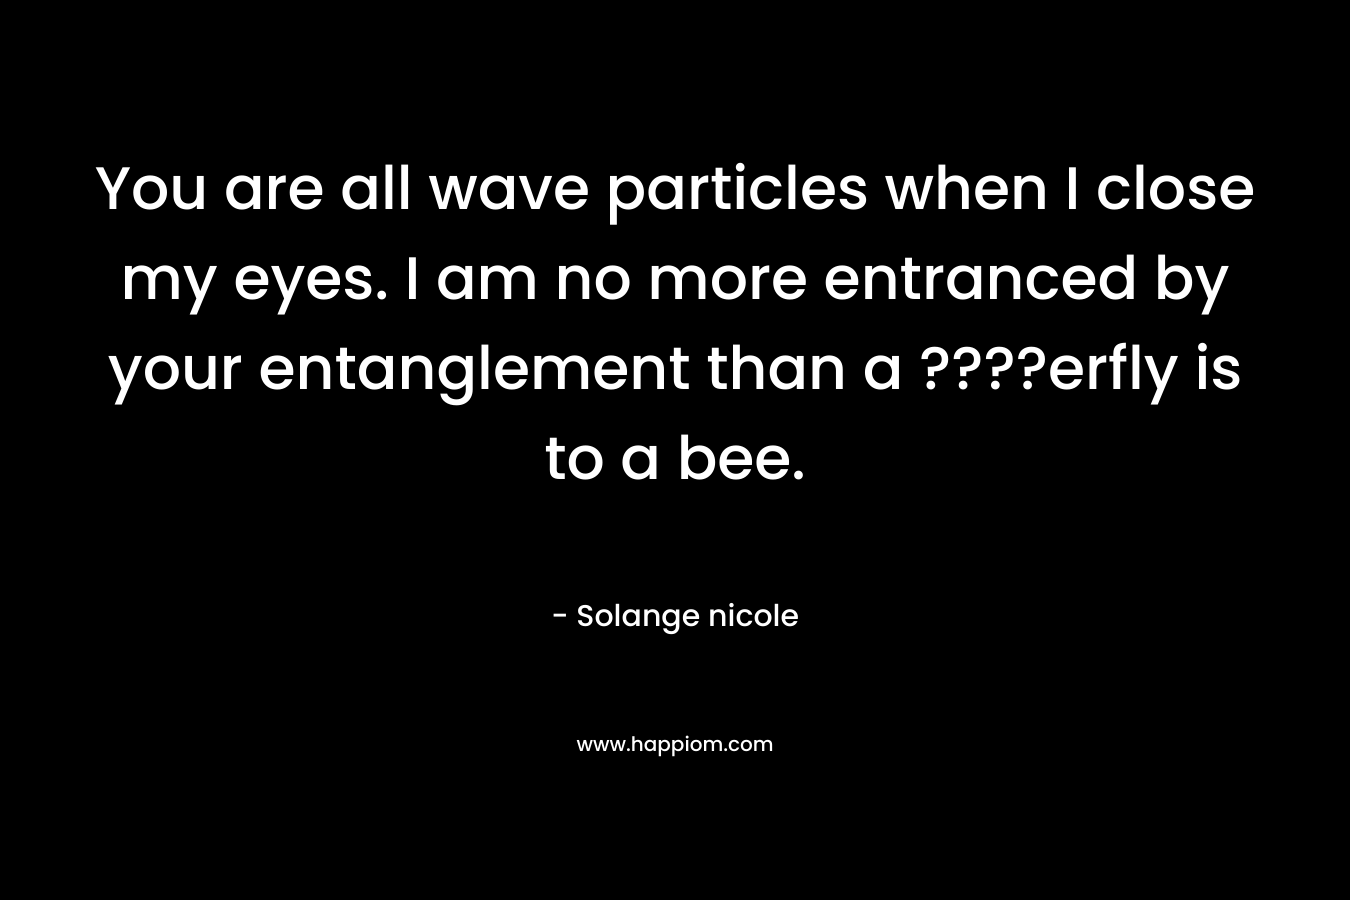 You are all wave particles when I close my eyes. I am no more entranced by your entanglement than a ????erfly is to a bee. – Solange nicole